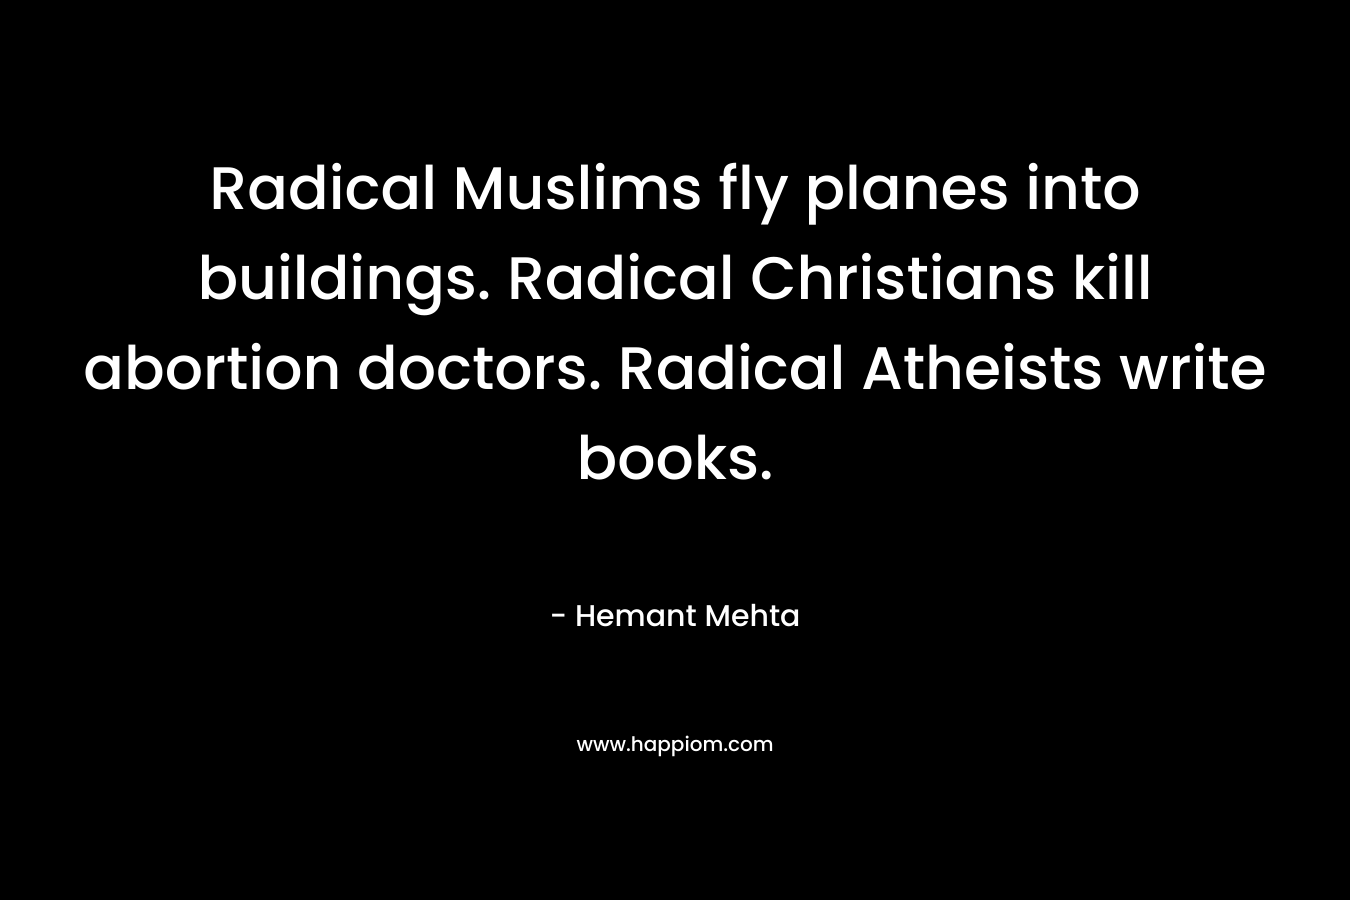 Radical Muslims fly planes into buildings. Radical Christians kill abortion doctors. Radical Atheists write books. – Hemant Mehta